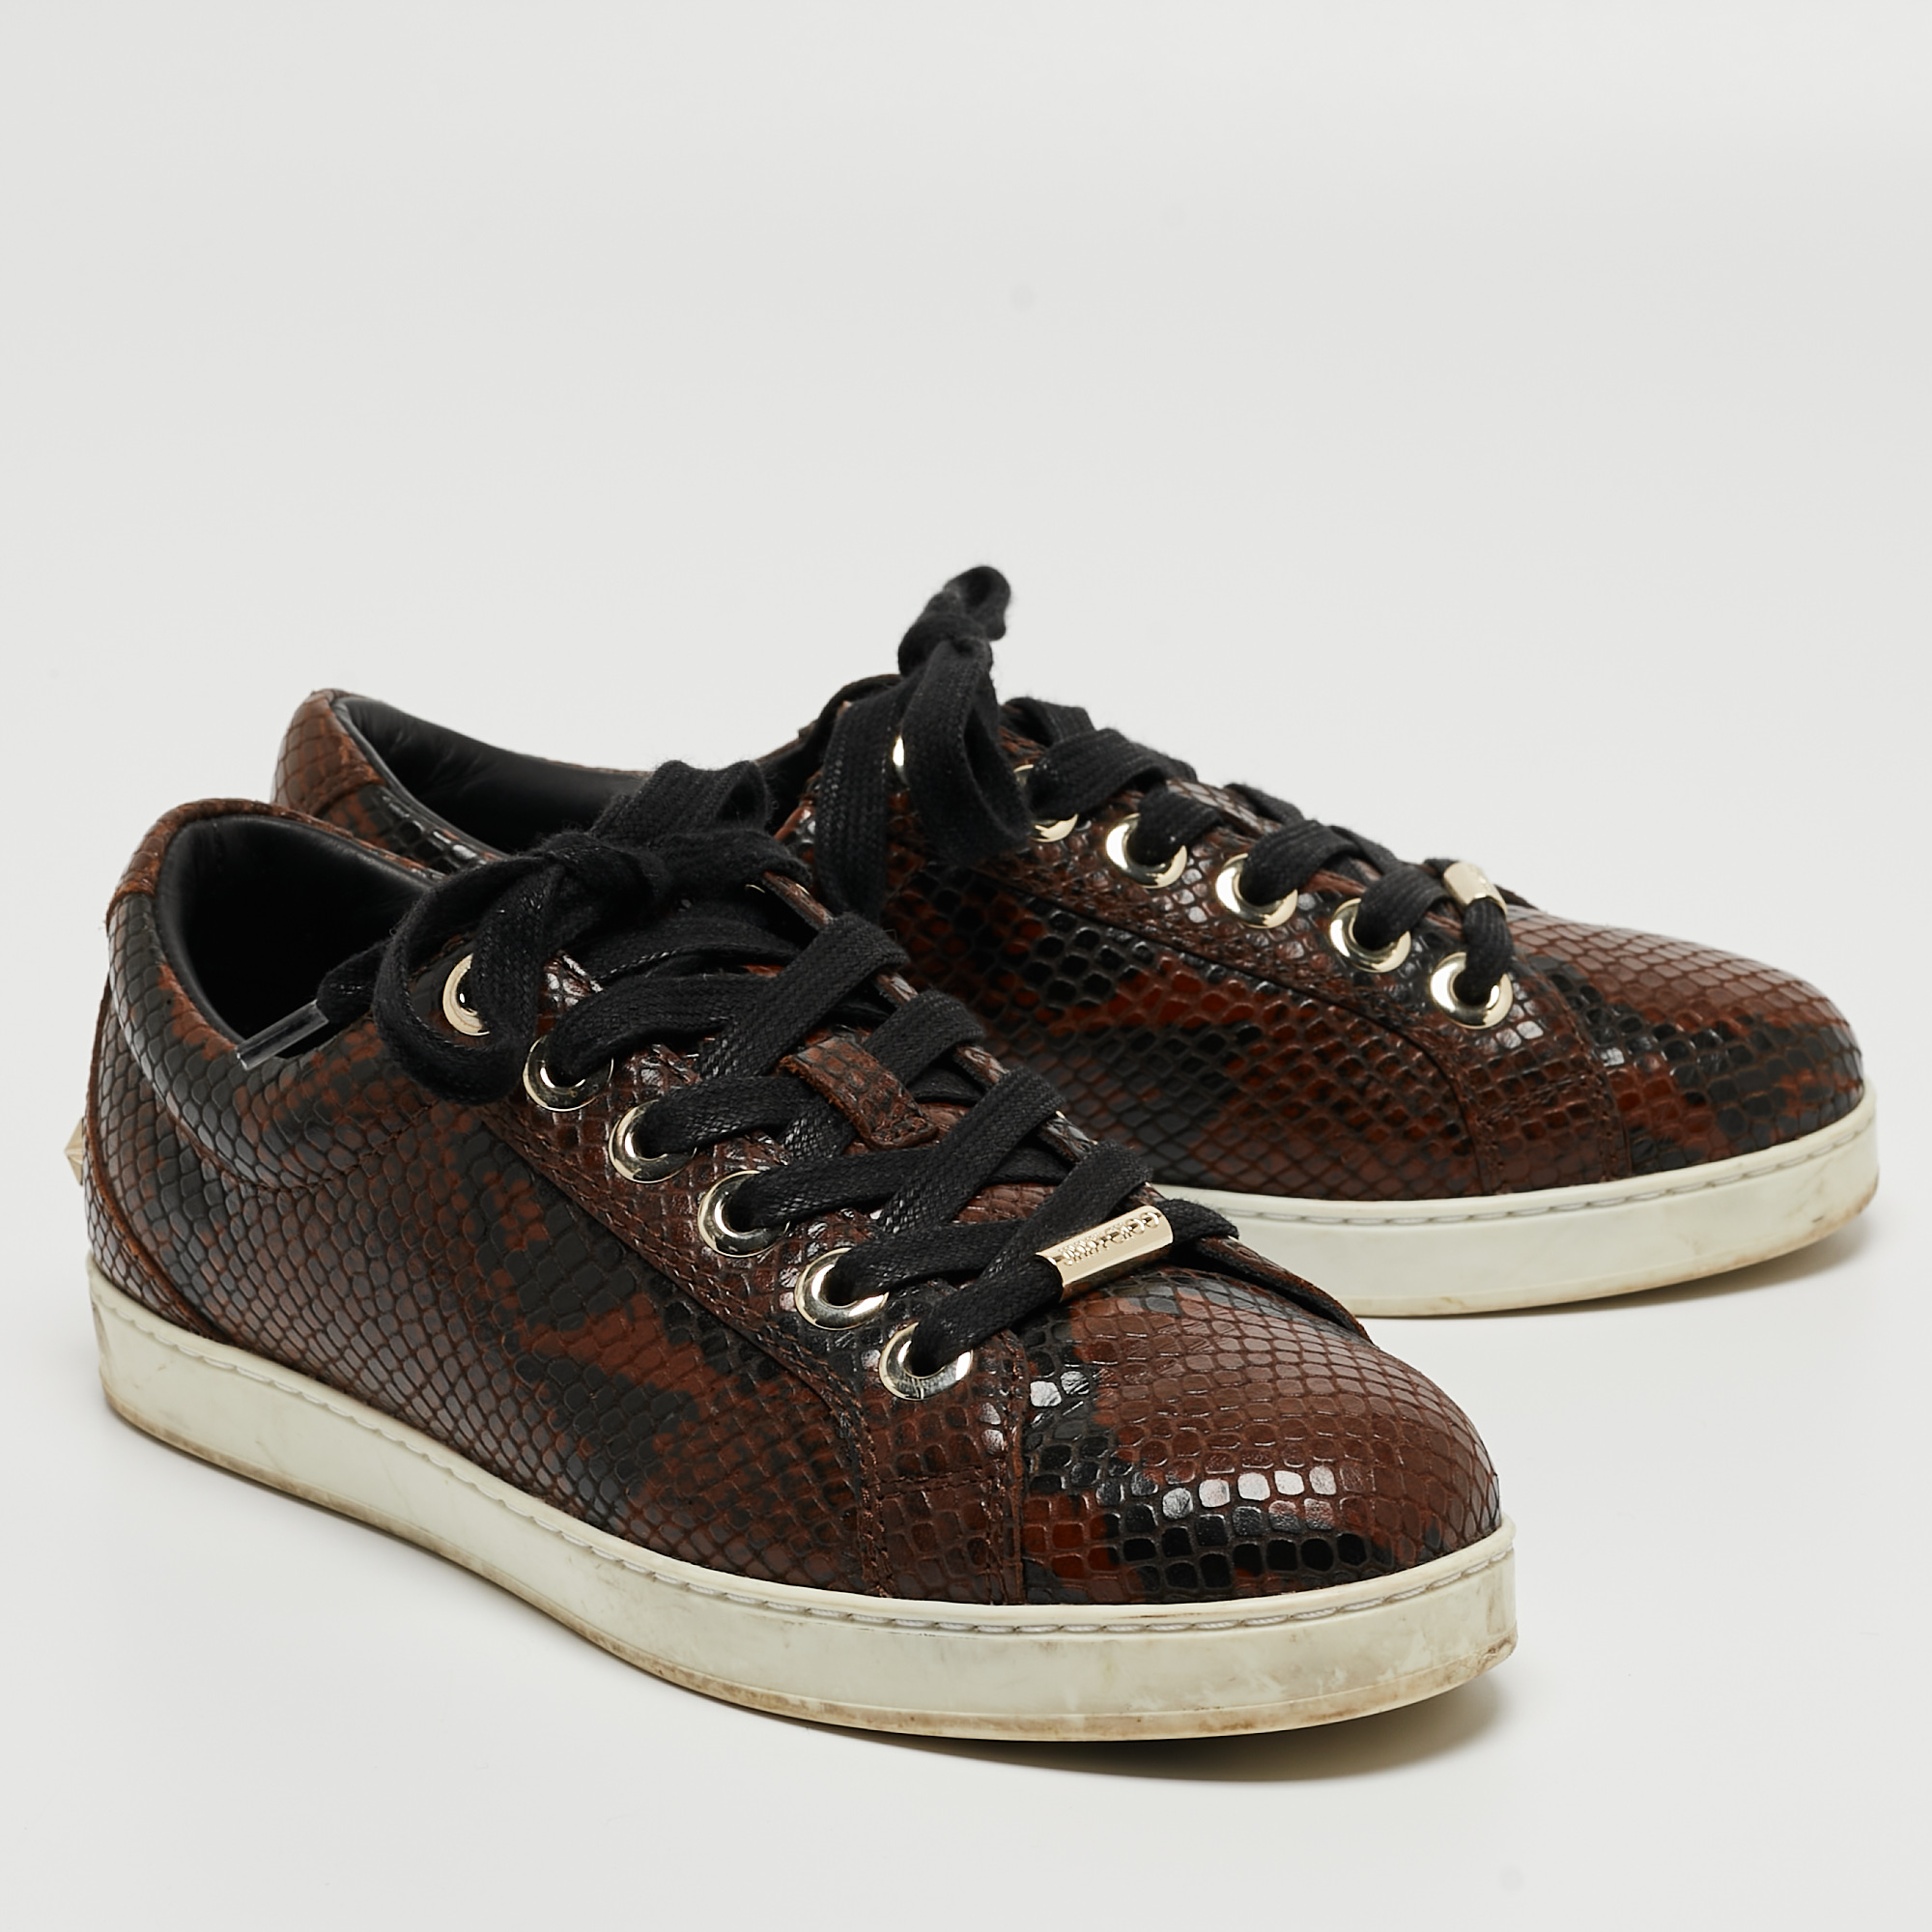 Jimmy Choo Brown Python Embossed Leather Lace Up Sneakers Size 36.5